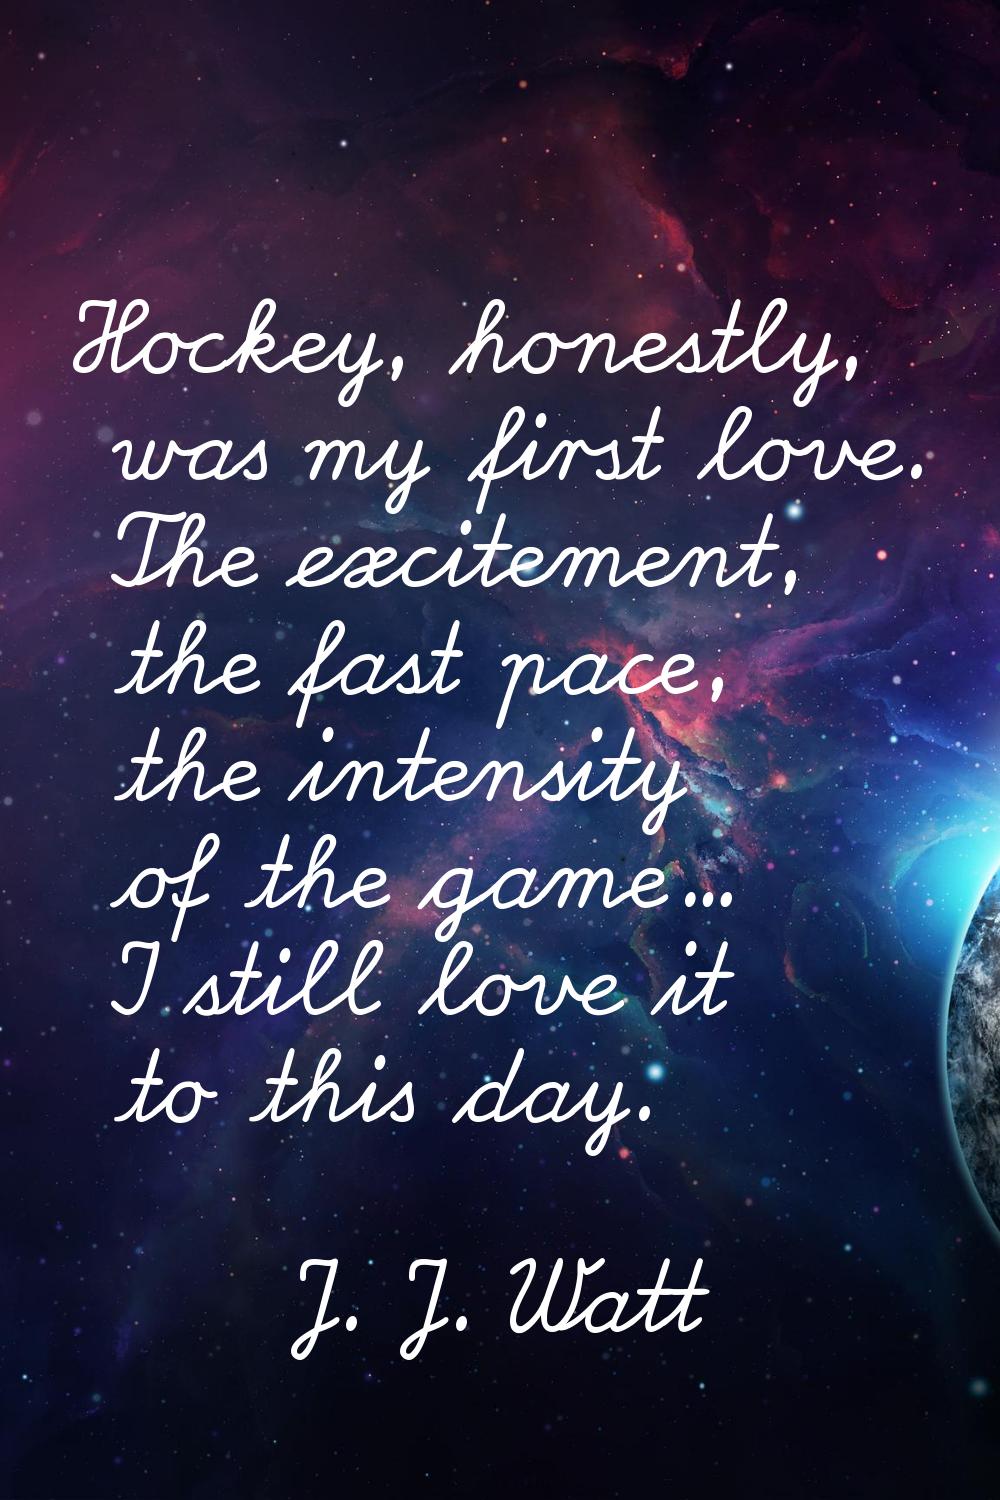 Hockey, honestly, was my first love. The excitement, the fast pace, the intensity of the game... I 